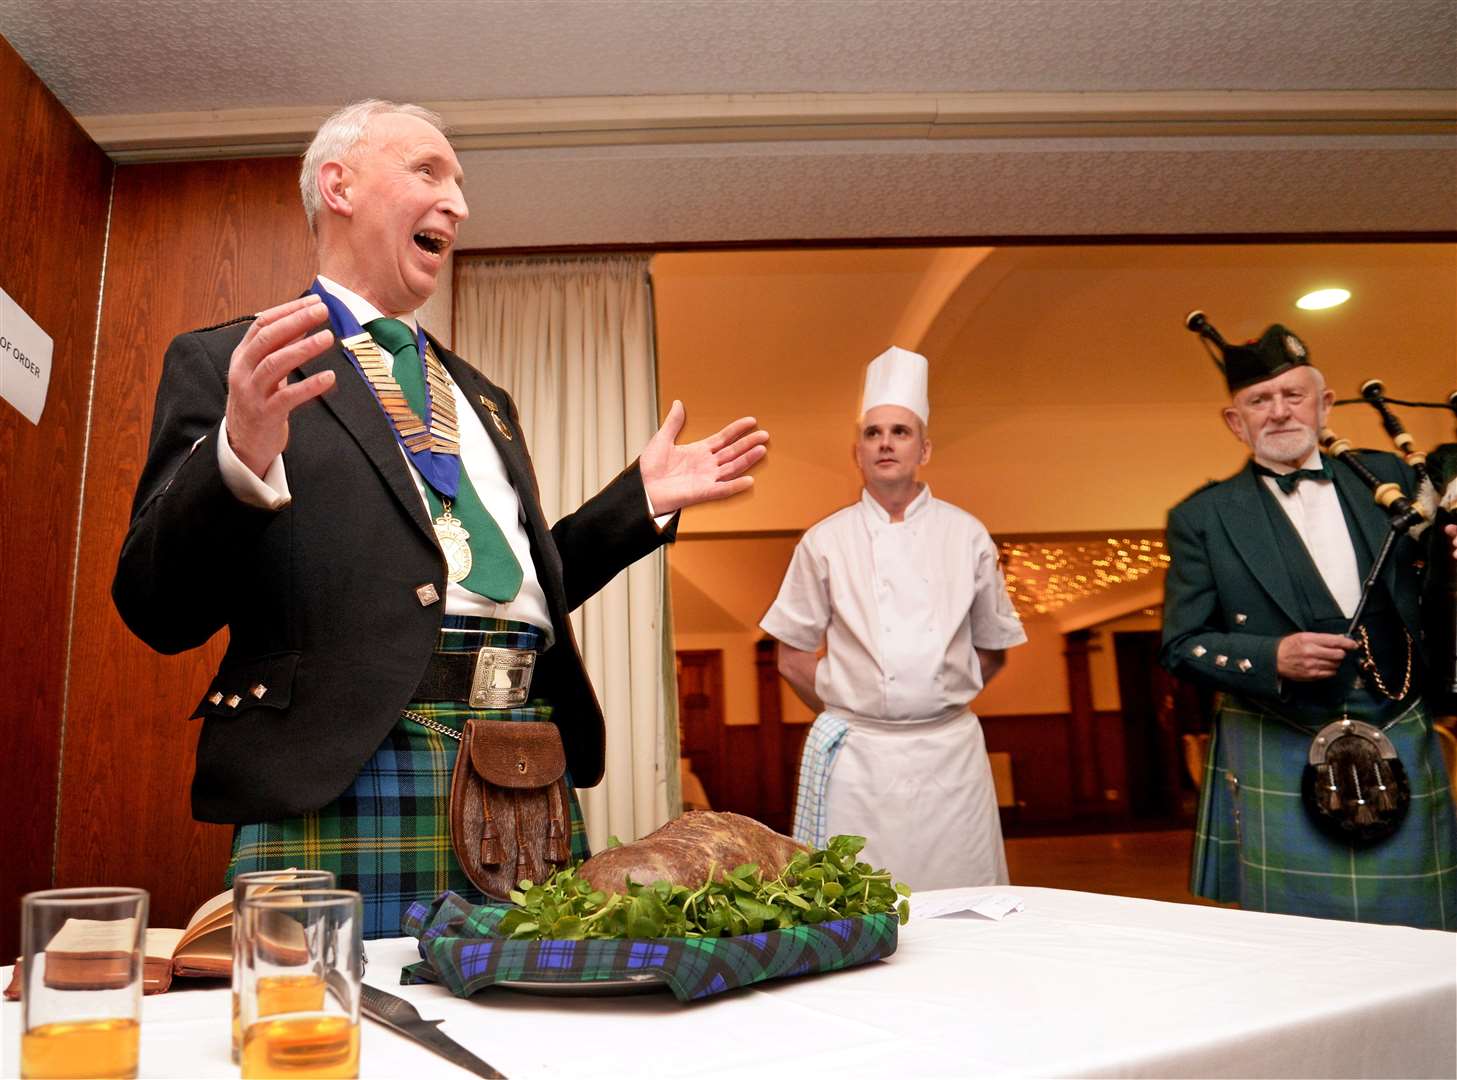 Iain Gordon, president of the Inverness Burns Club, recites the Address to a Haggis. Looking on are chef Alan Ludlow and piper Bill Hamilton.